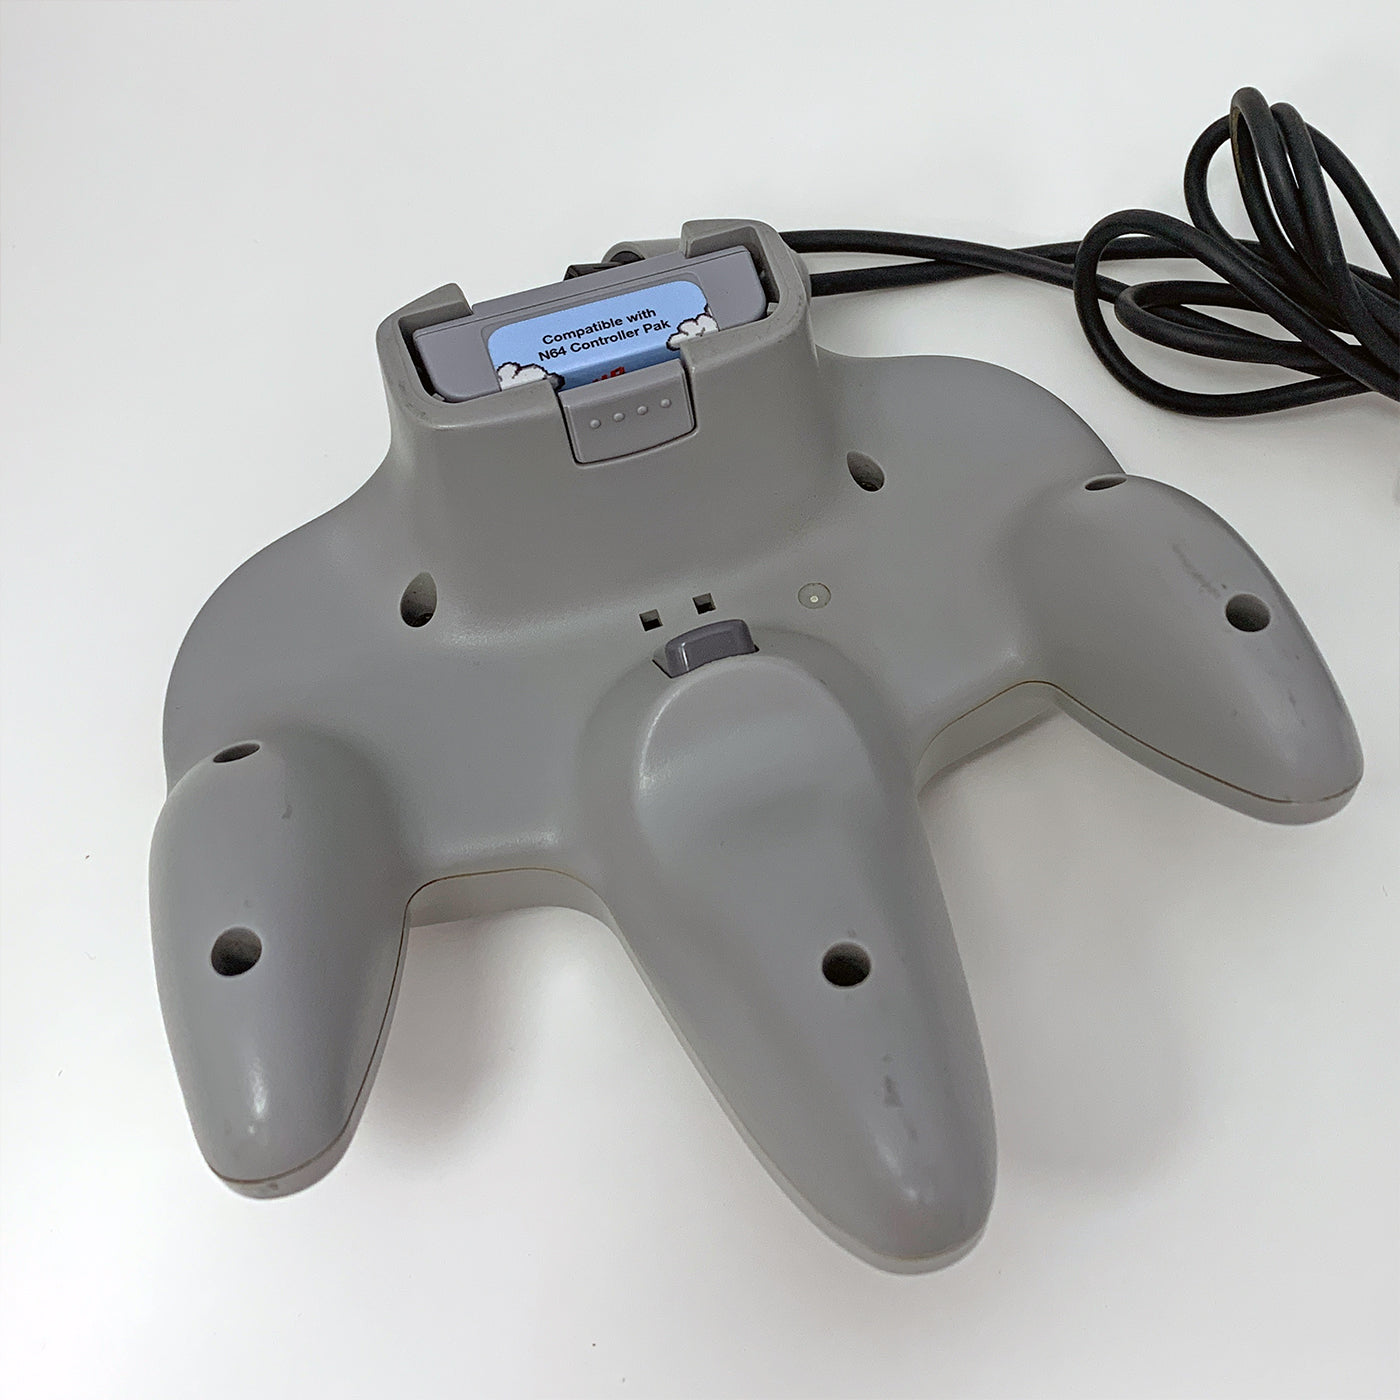 N64 Controller Pak Slot Cleaner -  Cleaning Cartridge by 1UPcard?